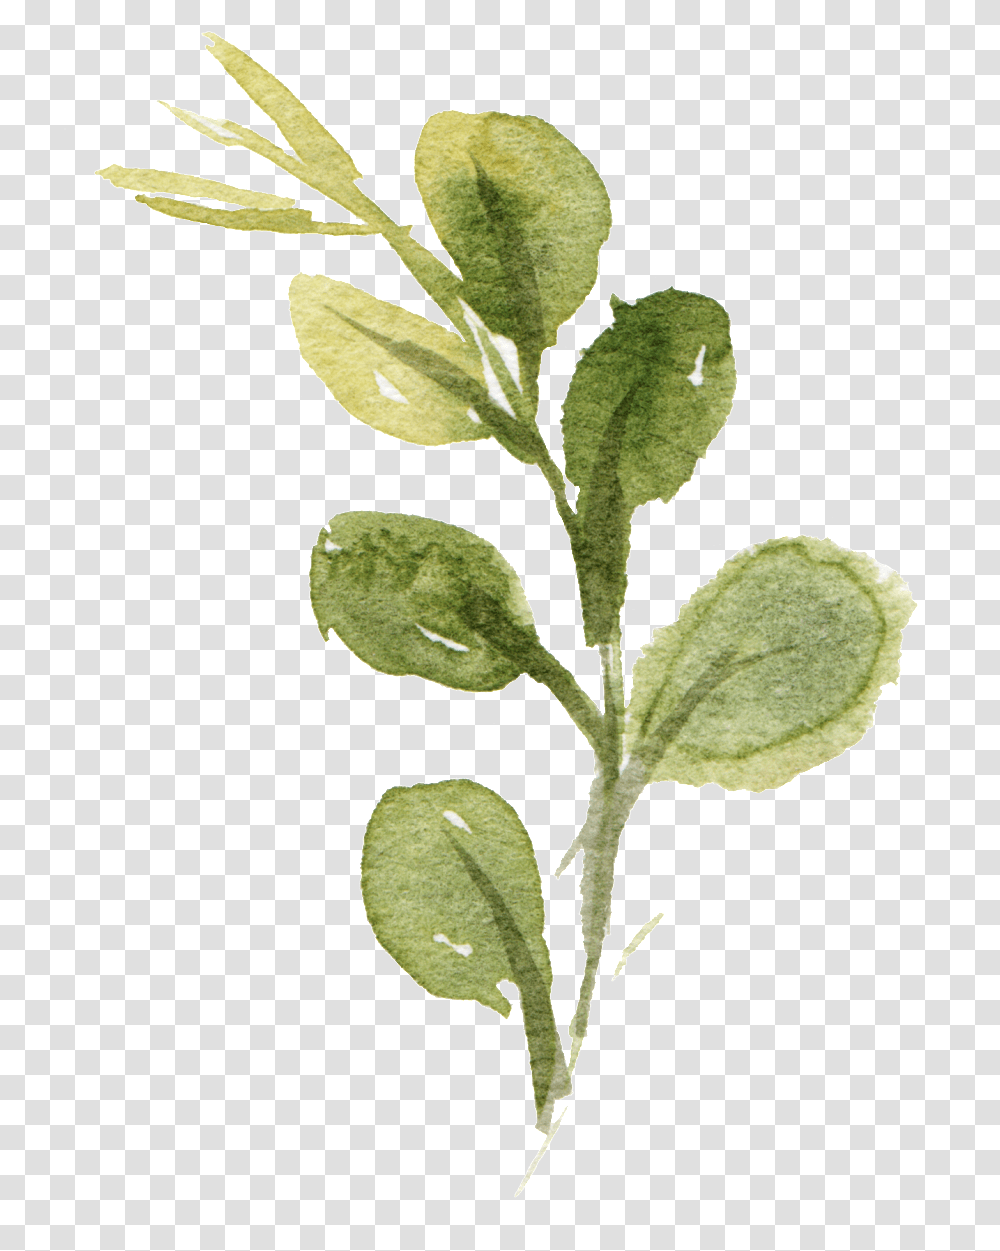 This Graphics Is Watercolor Hand Drawn Leaf About Leaves Free Watercolor, Plant, Spinach, Vegetable, Food Transparent Png